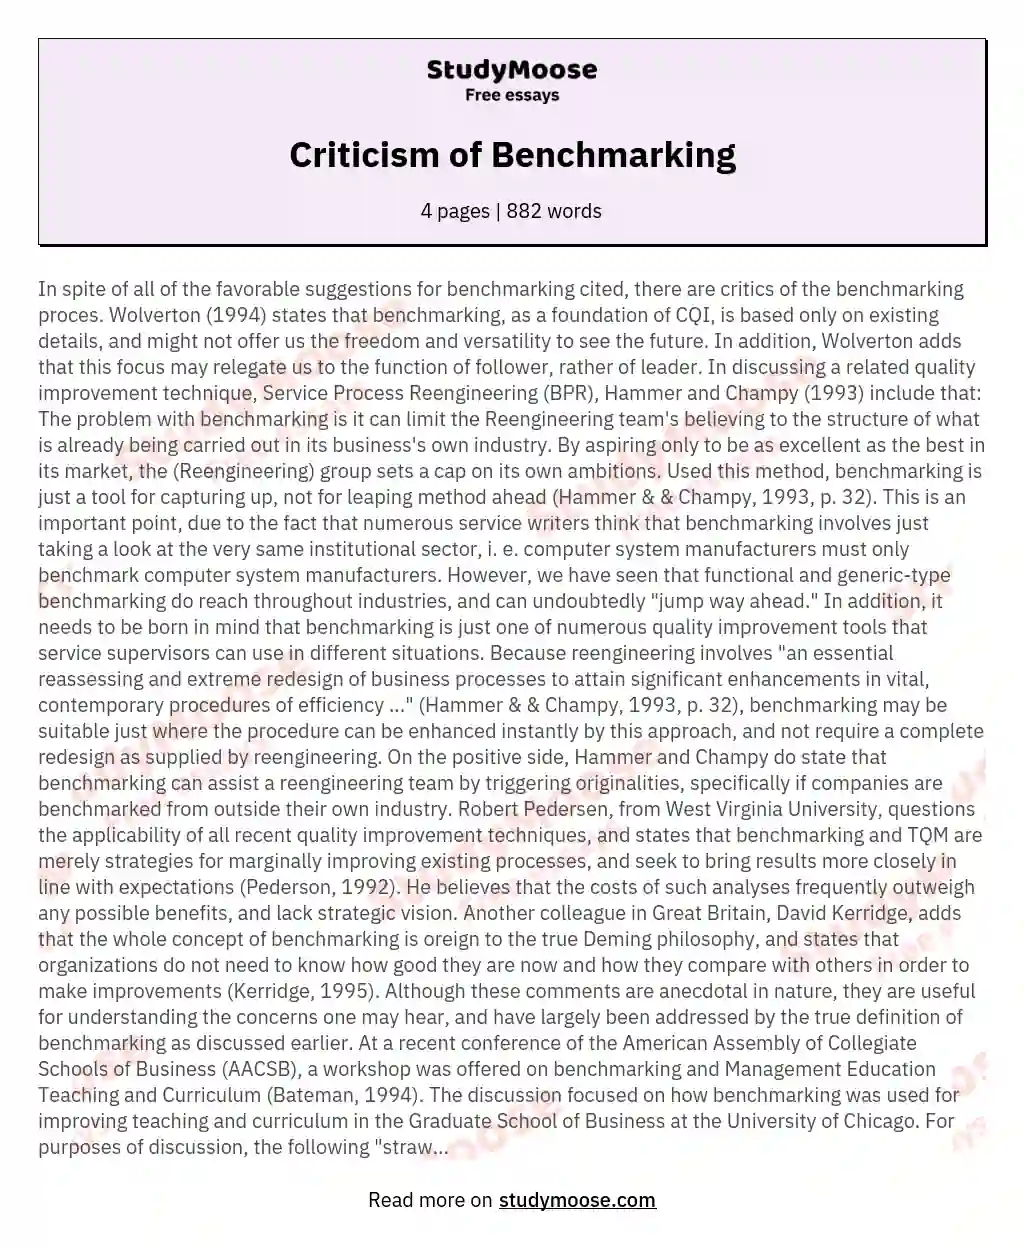 Criticism of Benchmarking essay